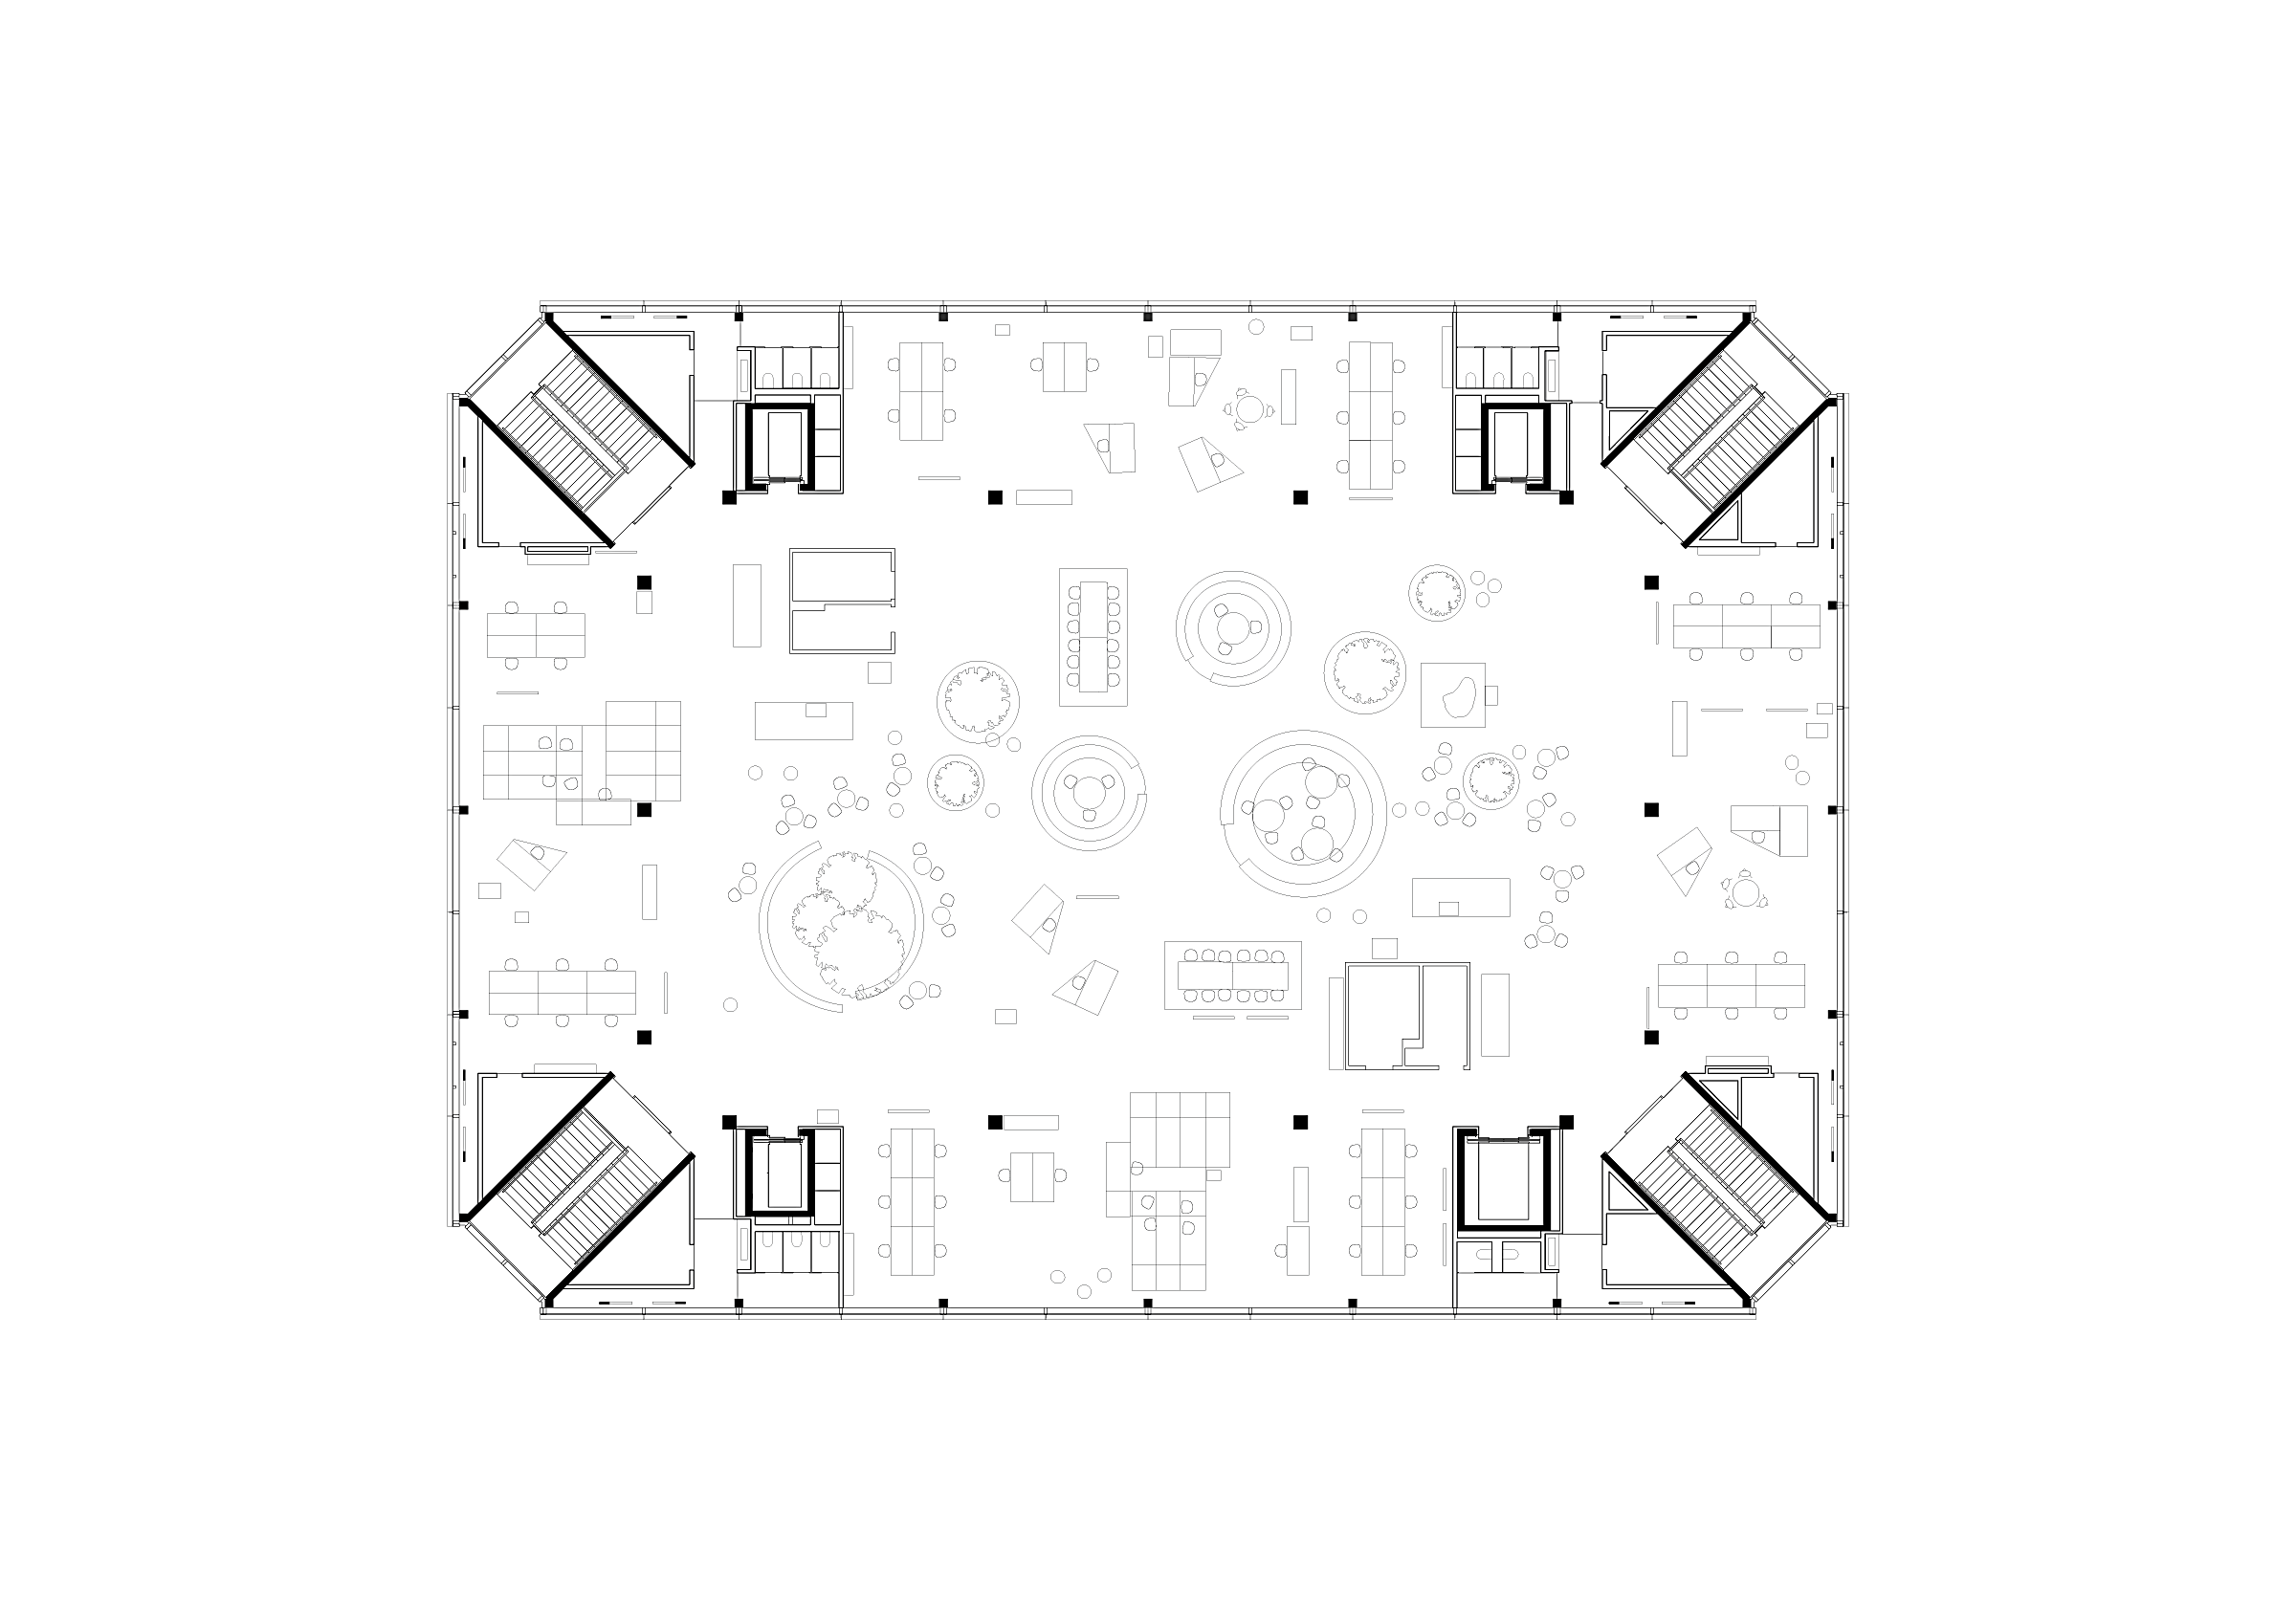 A floor plan showing office space and structural support routed to the corners